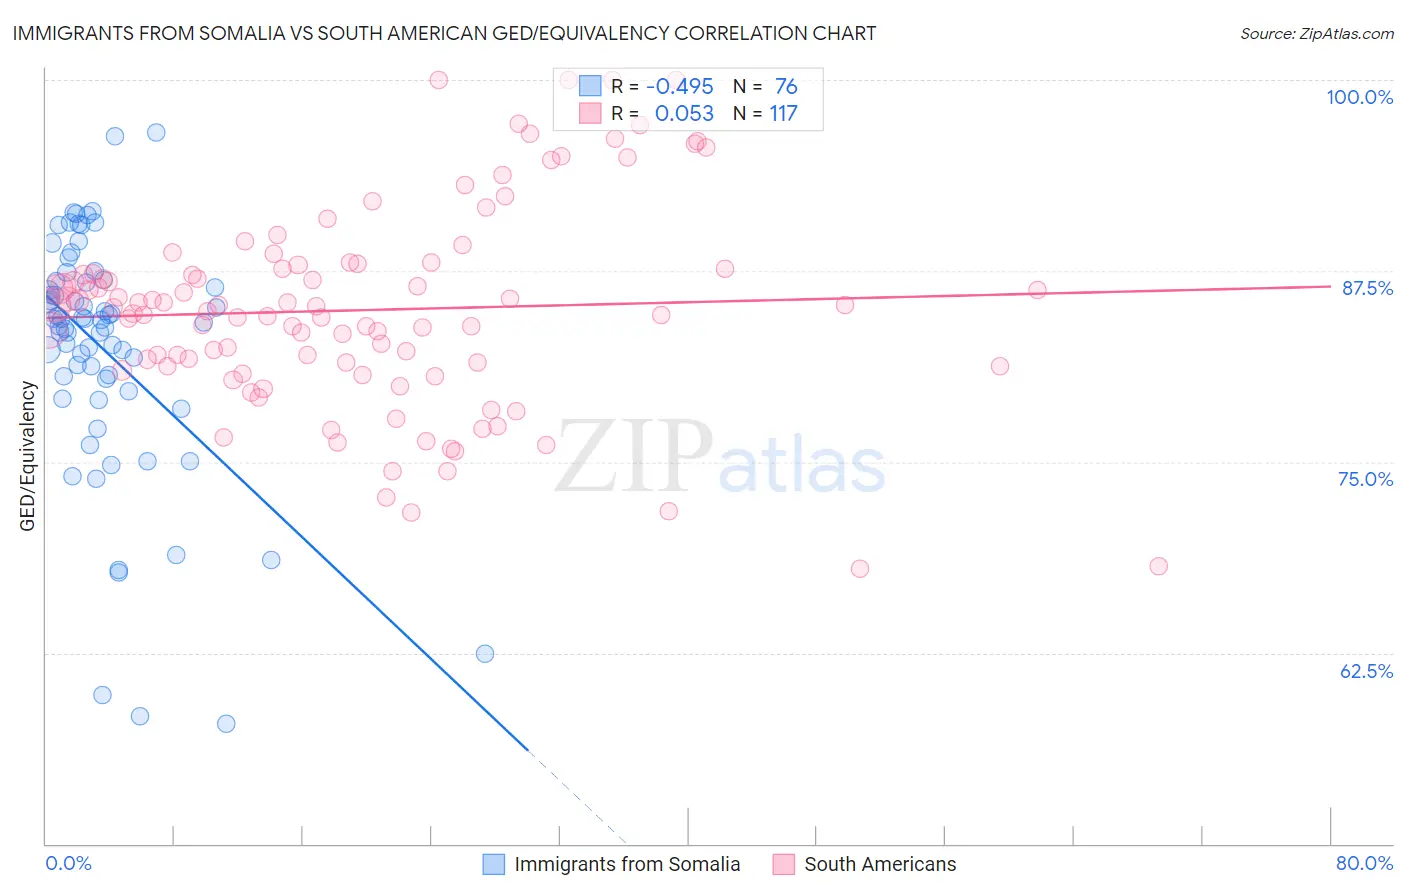 Immigrants from Somalia vs South American GED/Equivalency